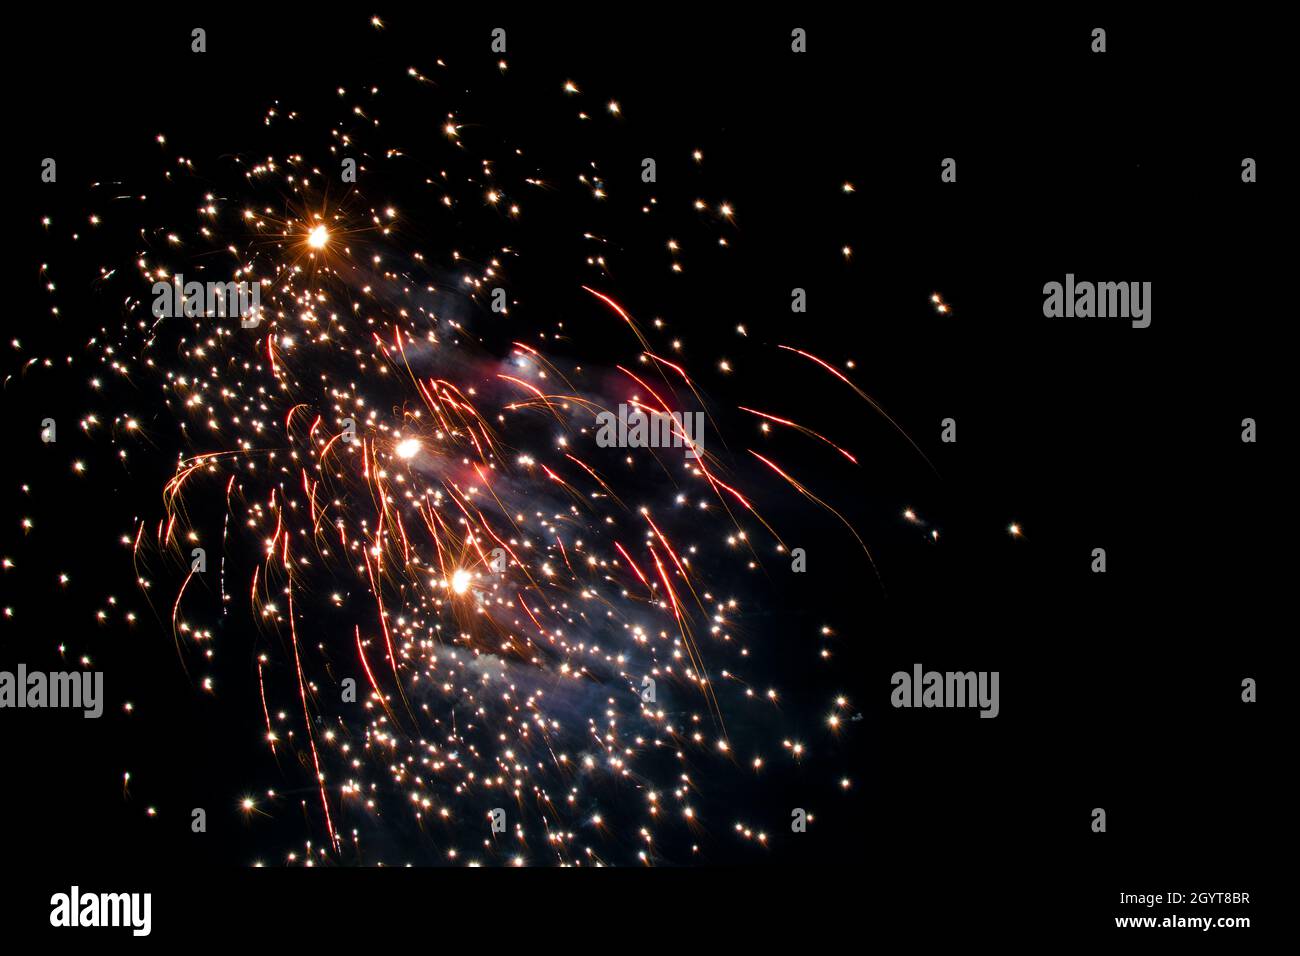 Colorful fireworks during celebration of diwali festival in India. Stock Photo